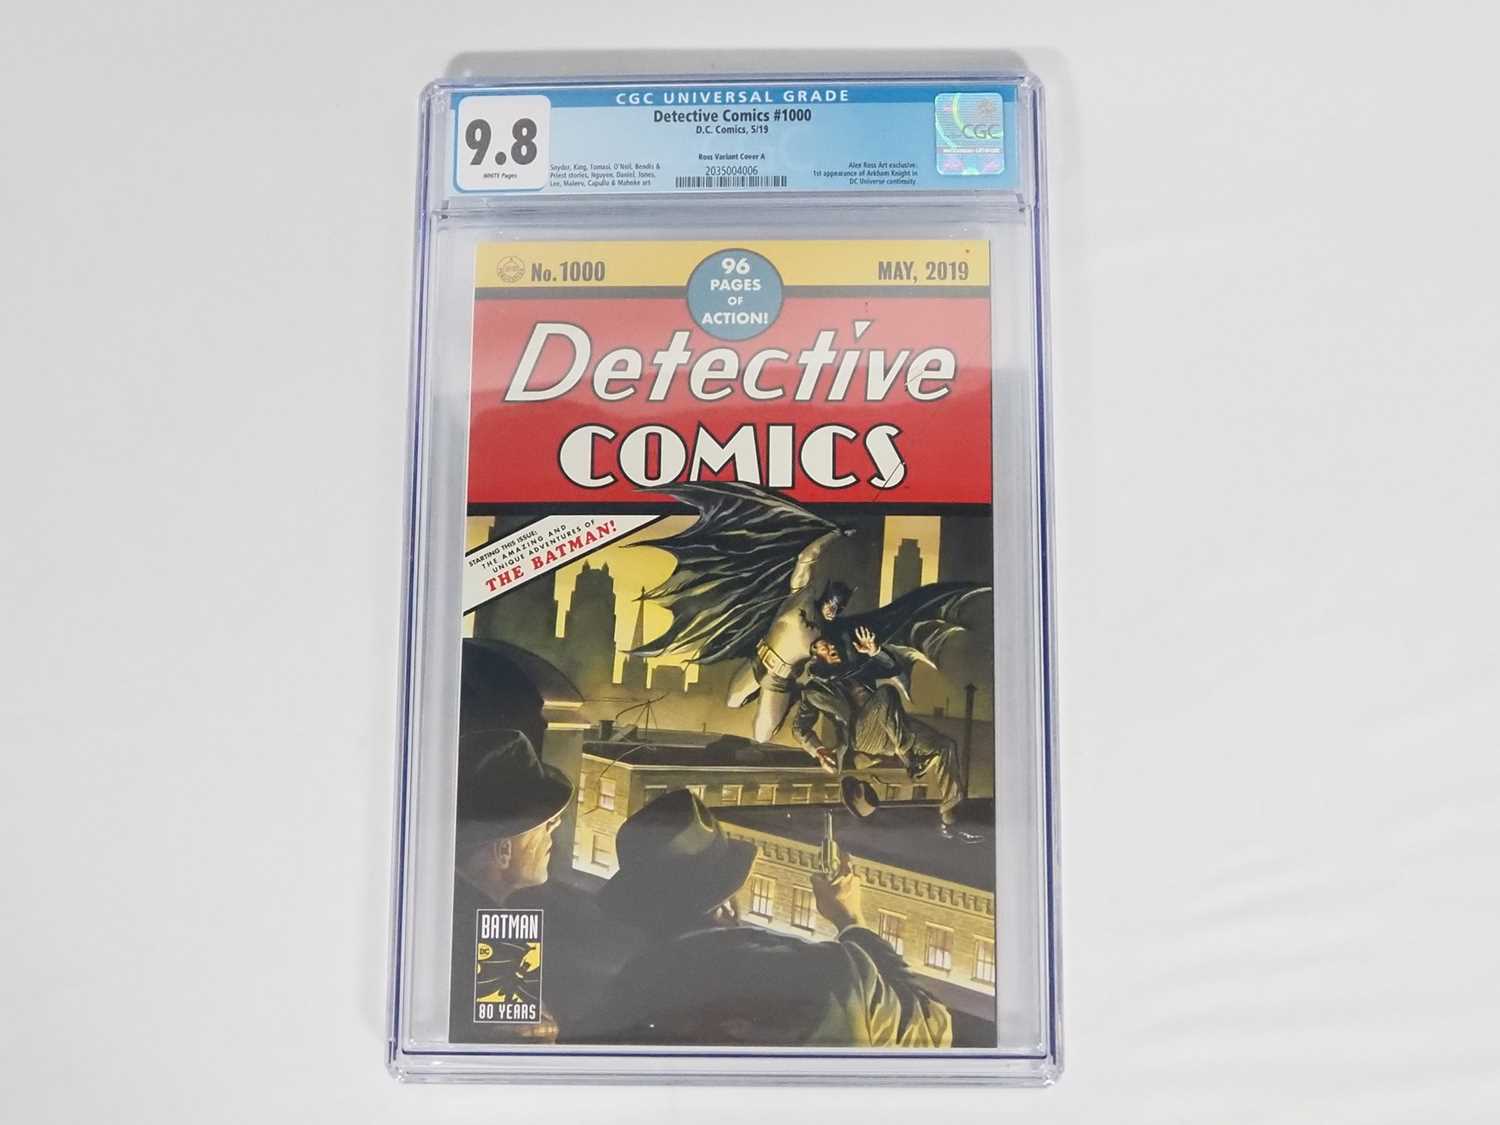 DETECTIVE COMICS #1000 - (2019 - DC) - GRADED 9.8 (NM/MINT) by CGC - First appearance of Arkham